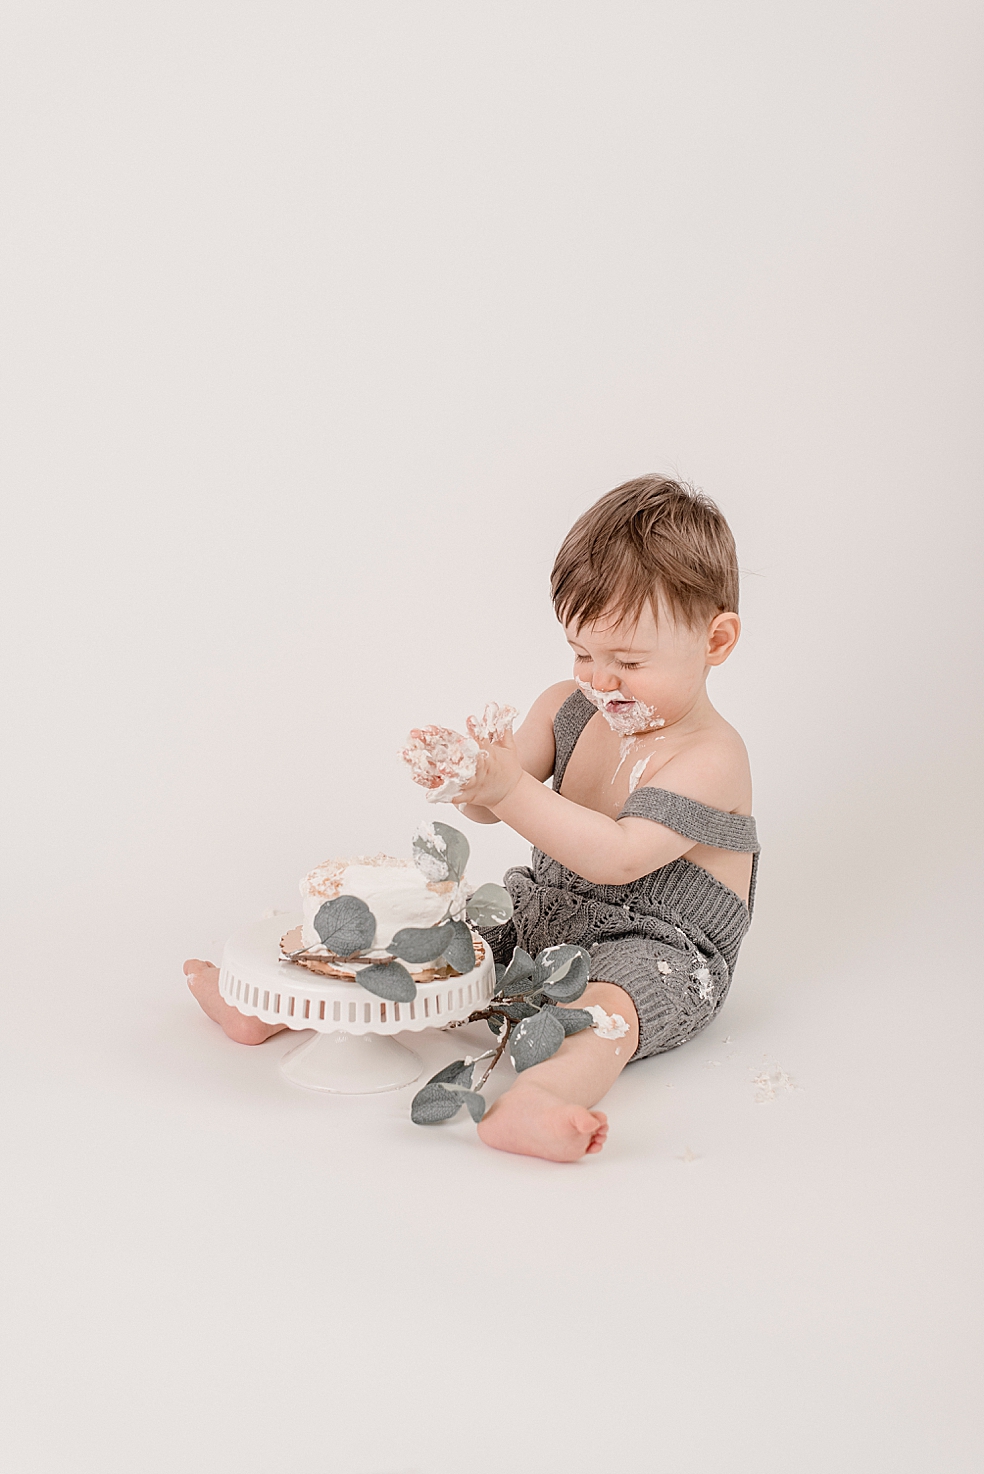 Baby boy playing with his smash cake | Photo by baby photographer South Huntsville Jessica Lee